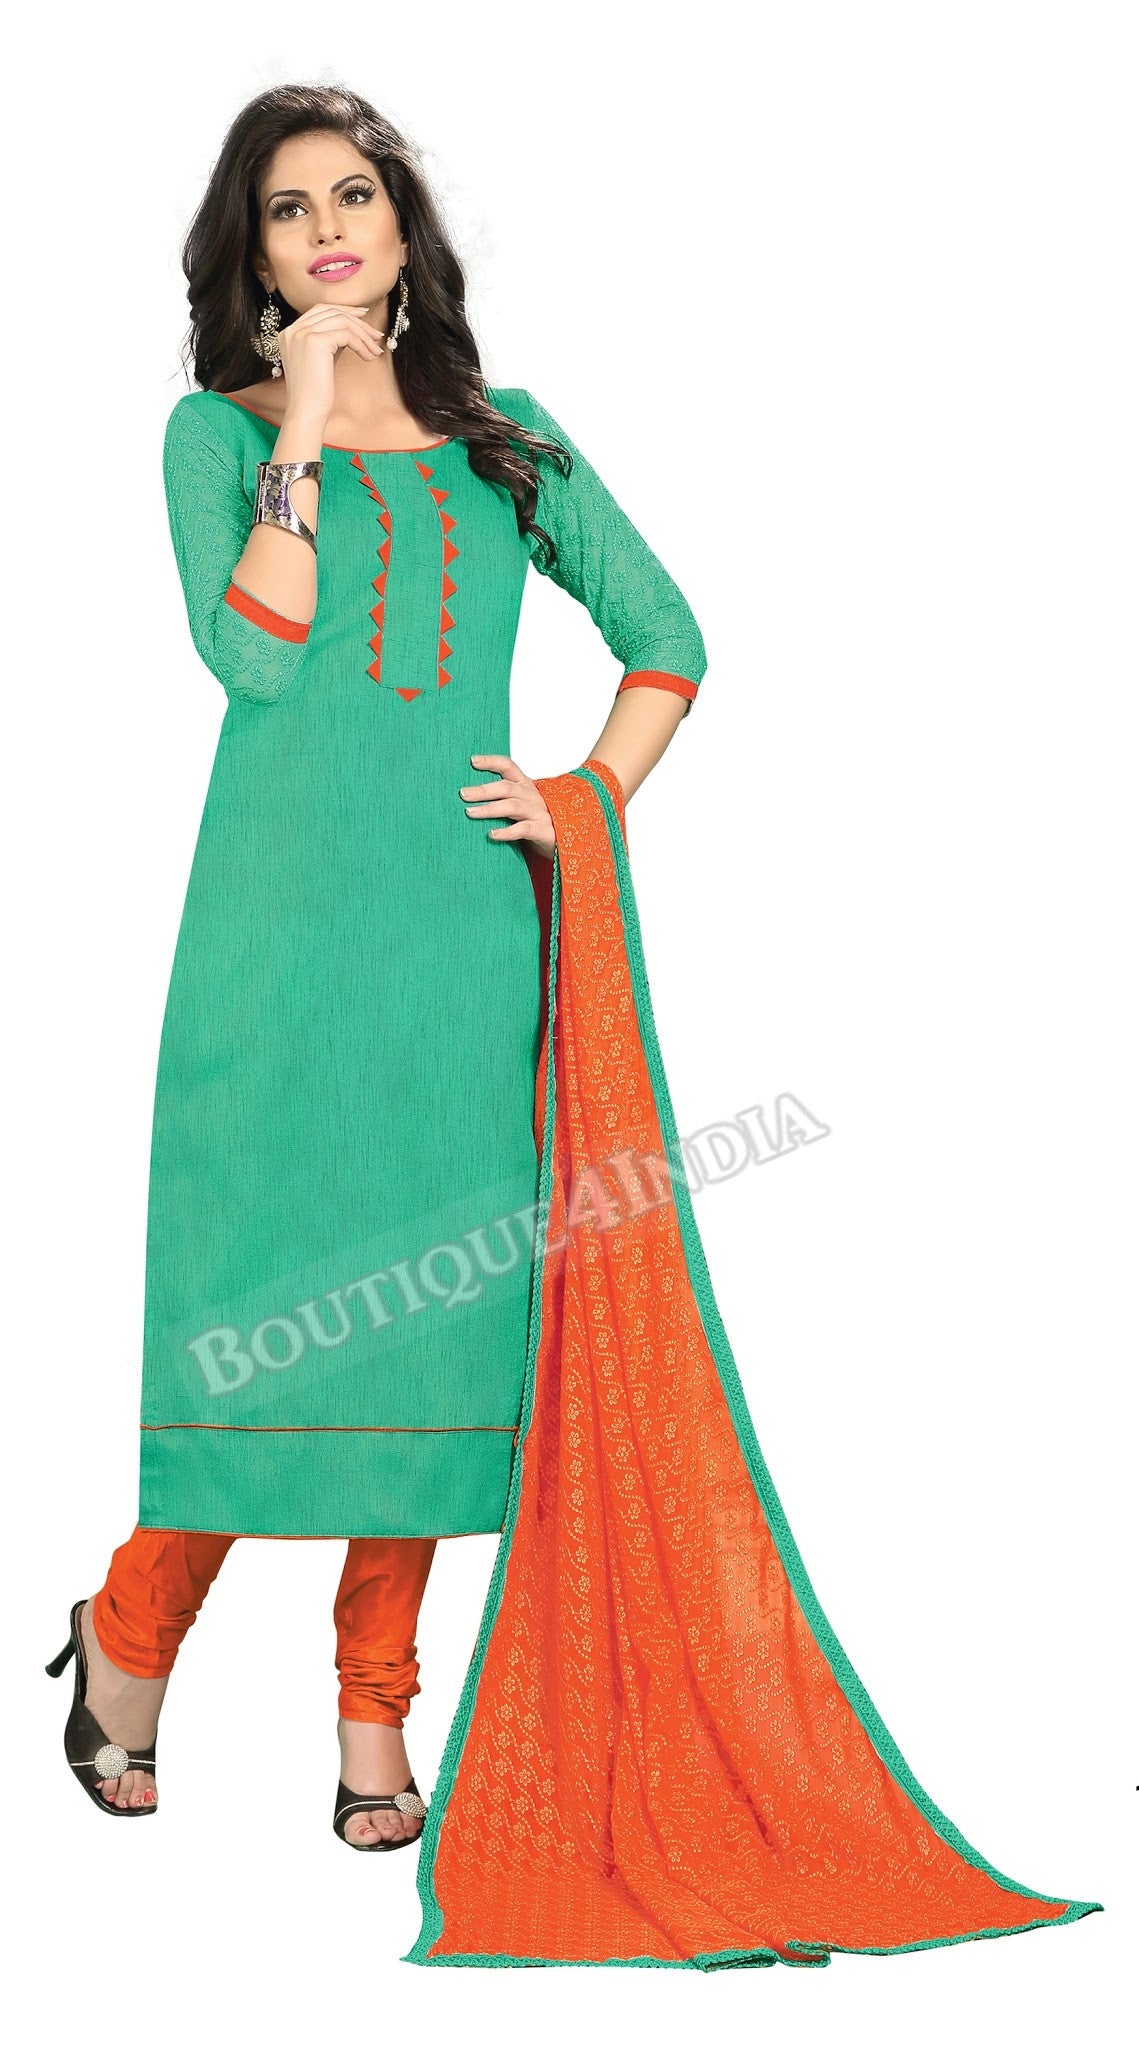 Emarald Color Chanderi Embroidered Straight Cut Salwar Suit